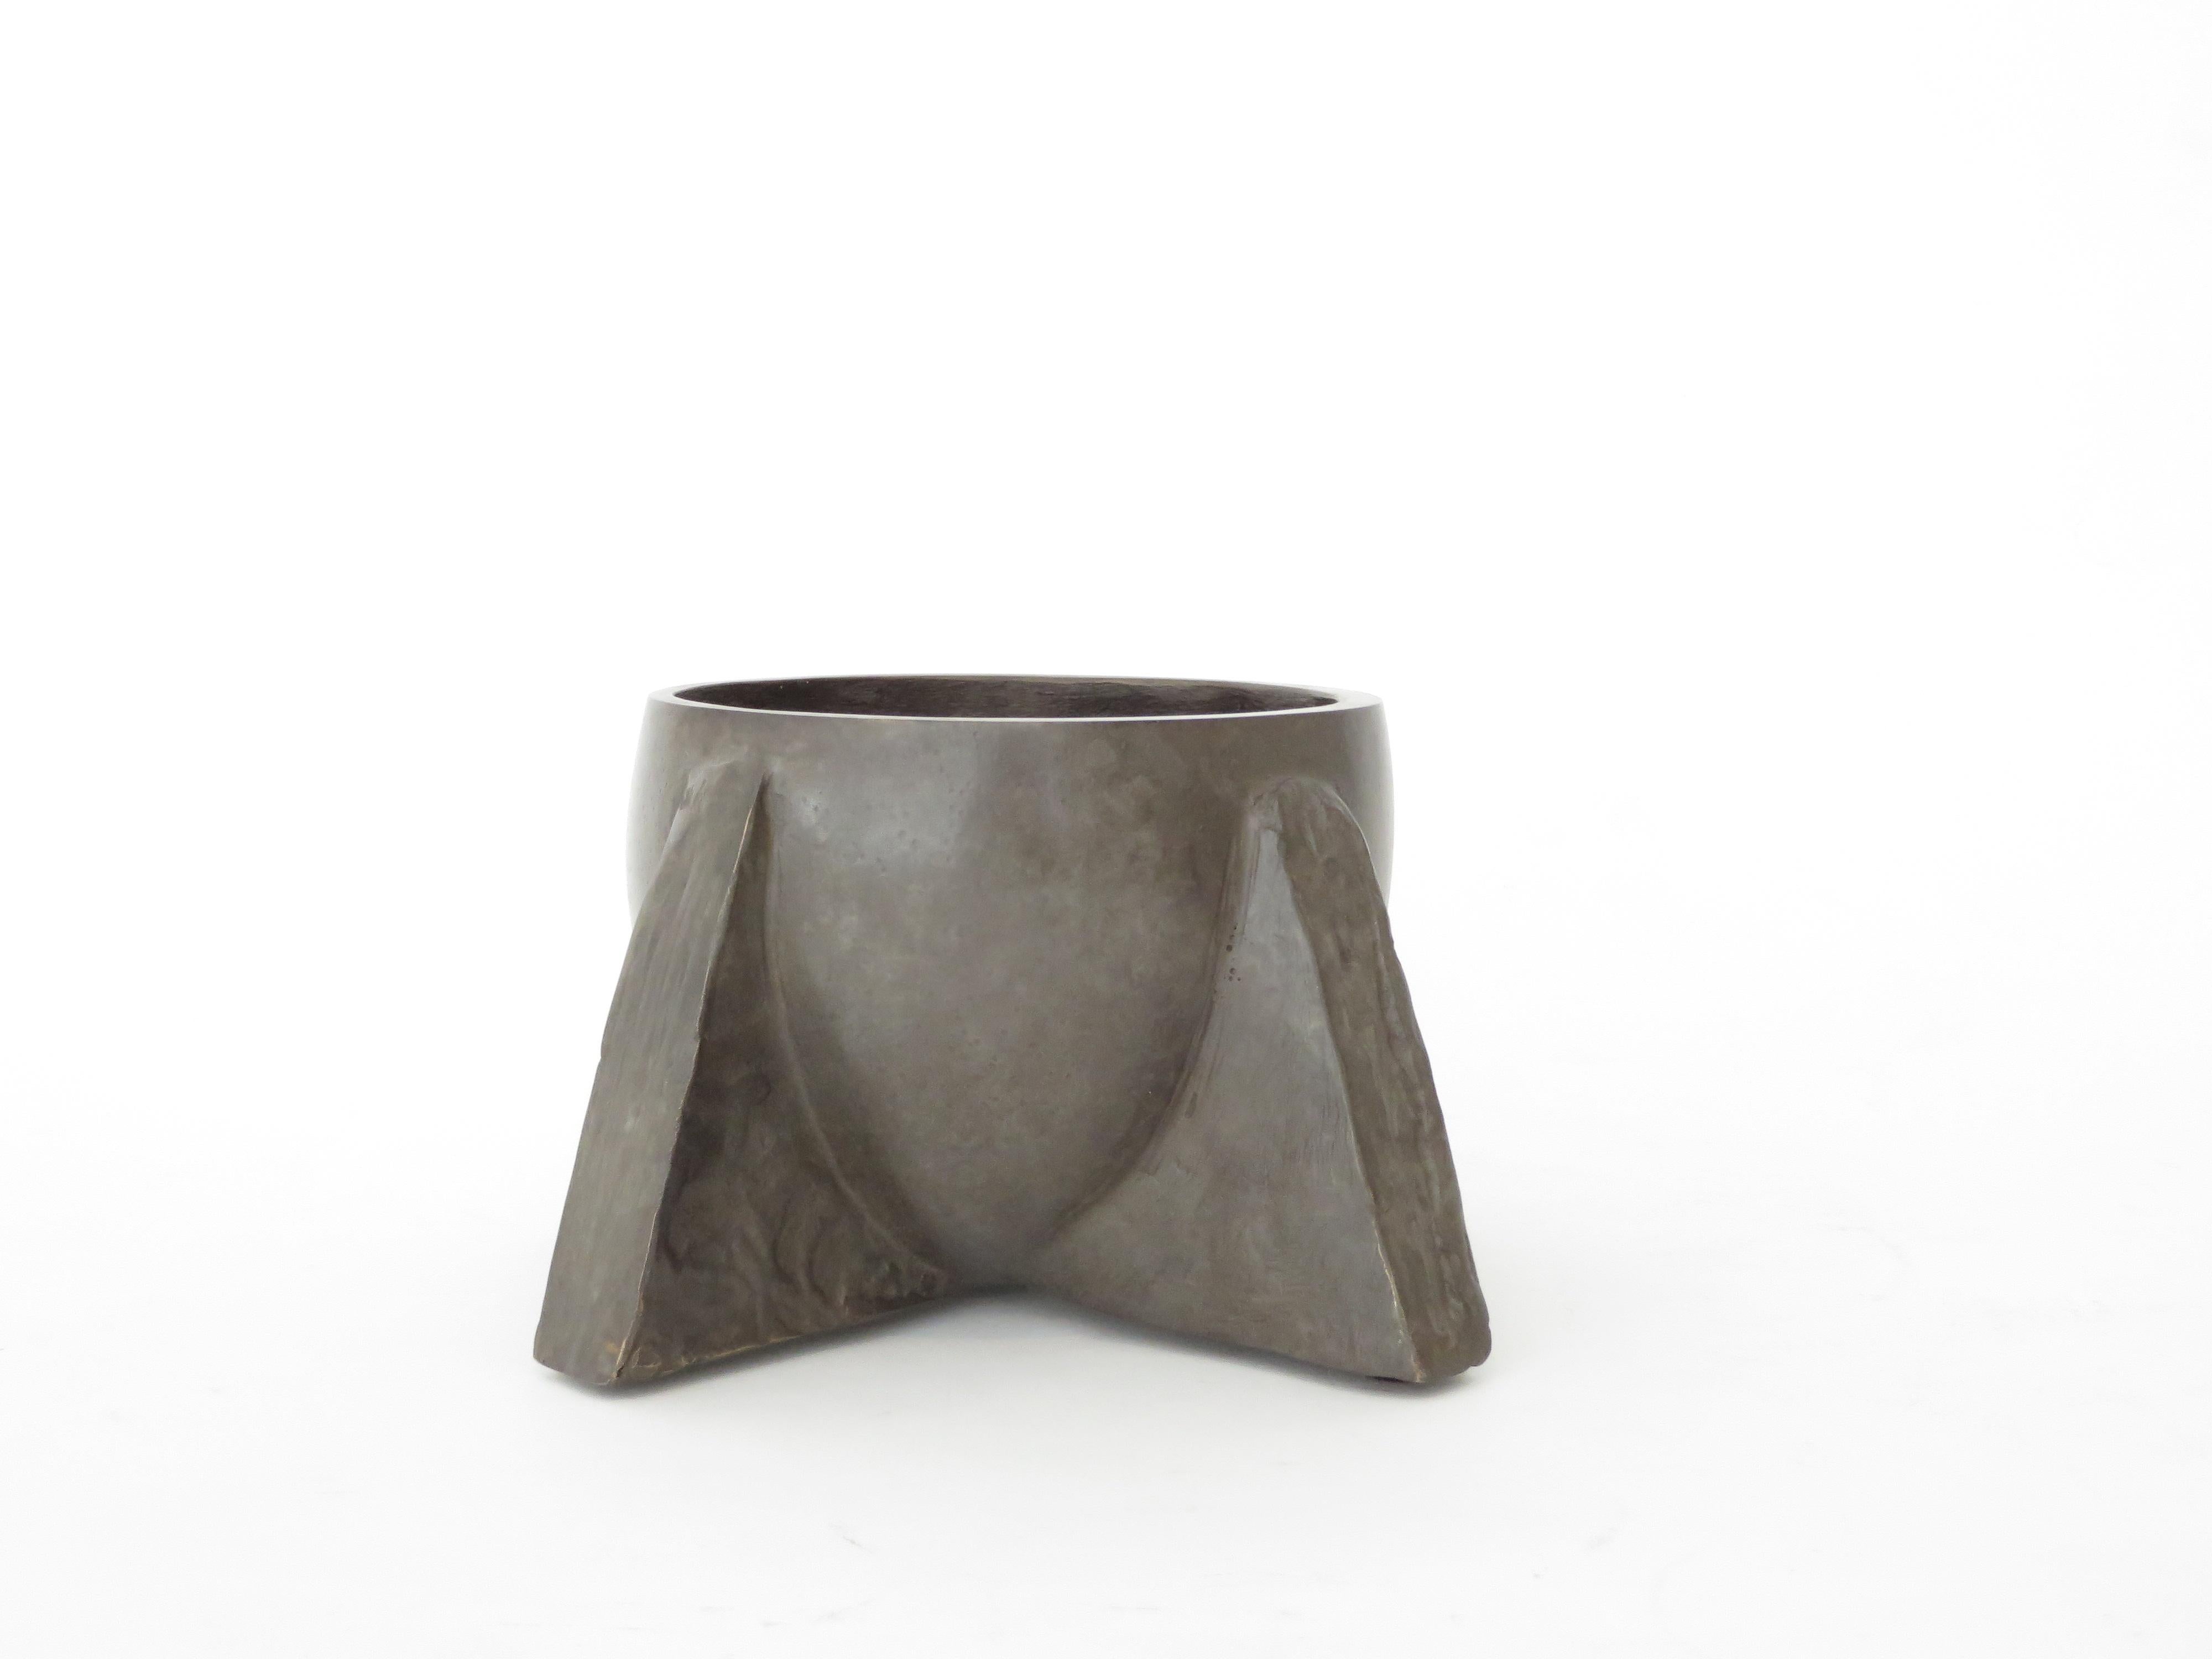 The now iconic bronze coupe vase from the Rick Owens bronze relic collection.
This is shown in the nitrate patina.
Each piece is handmade and hand patinated so there is always a slight variation in color.
Designed in 2012. Each bronze is